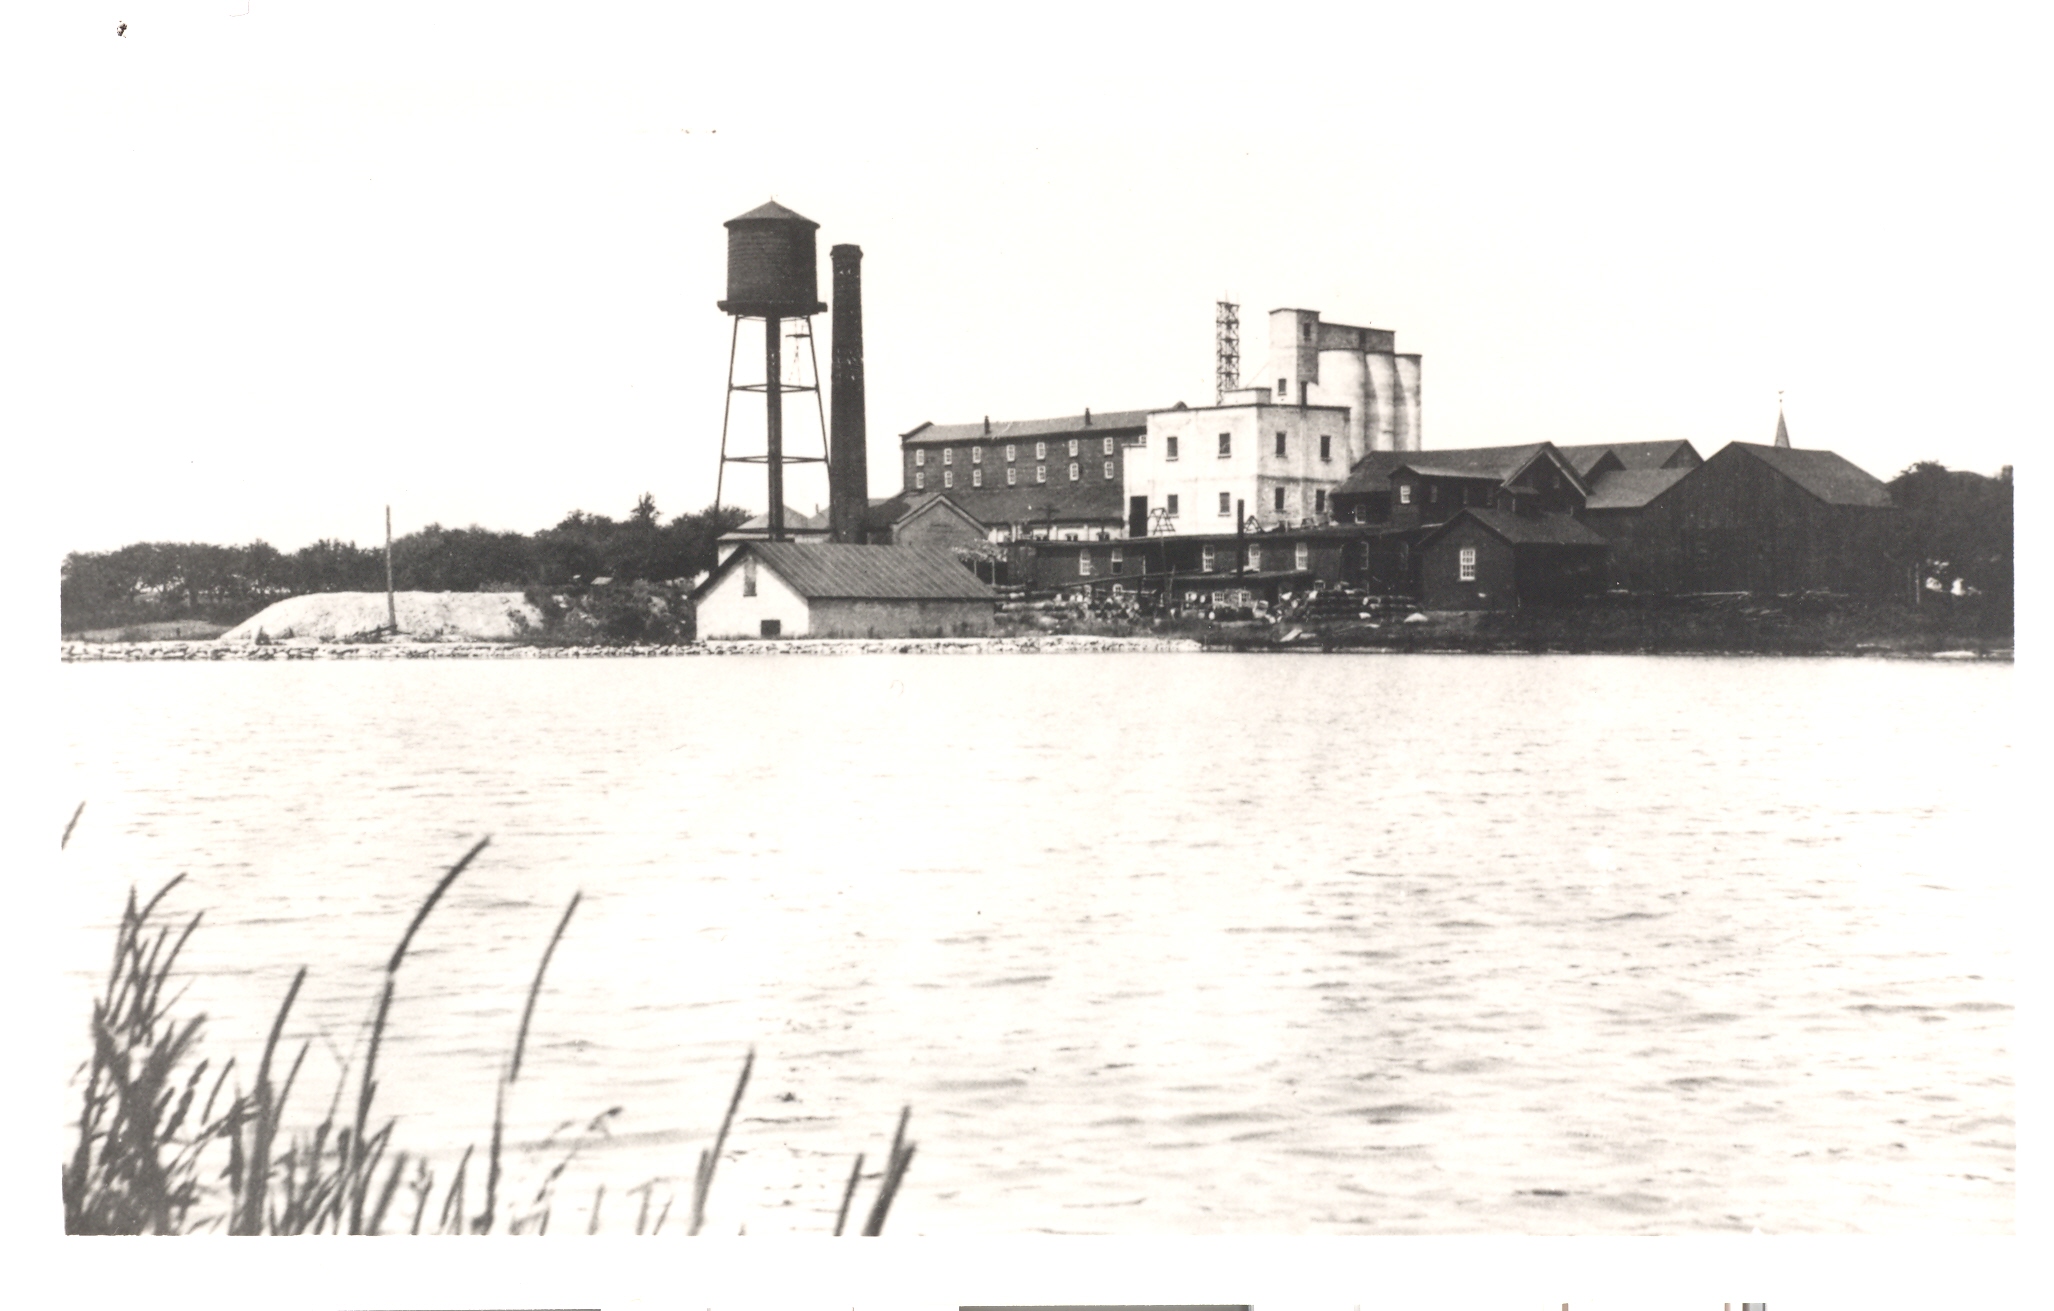 Linseed oil mill